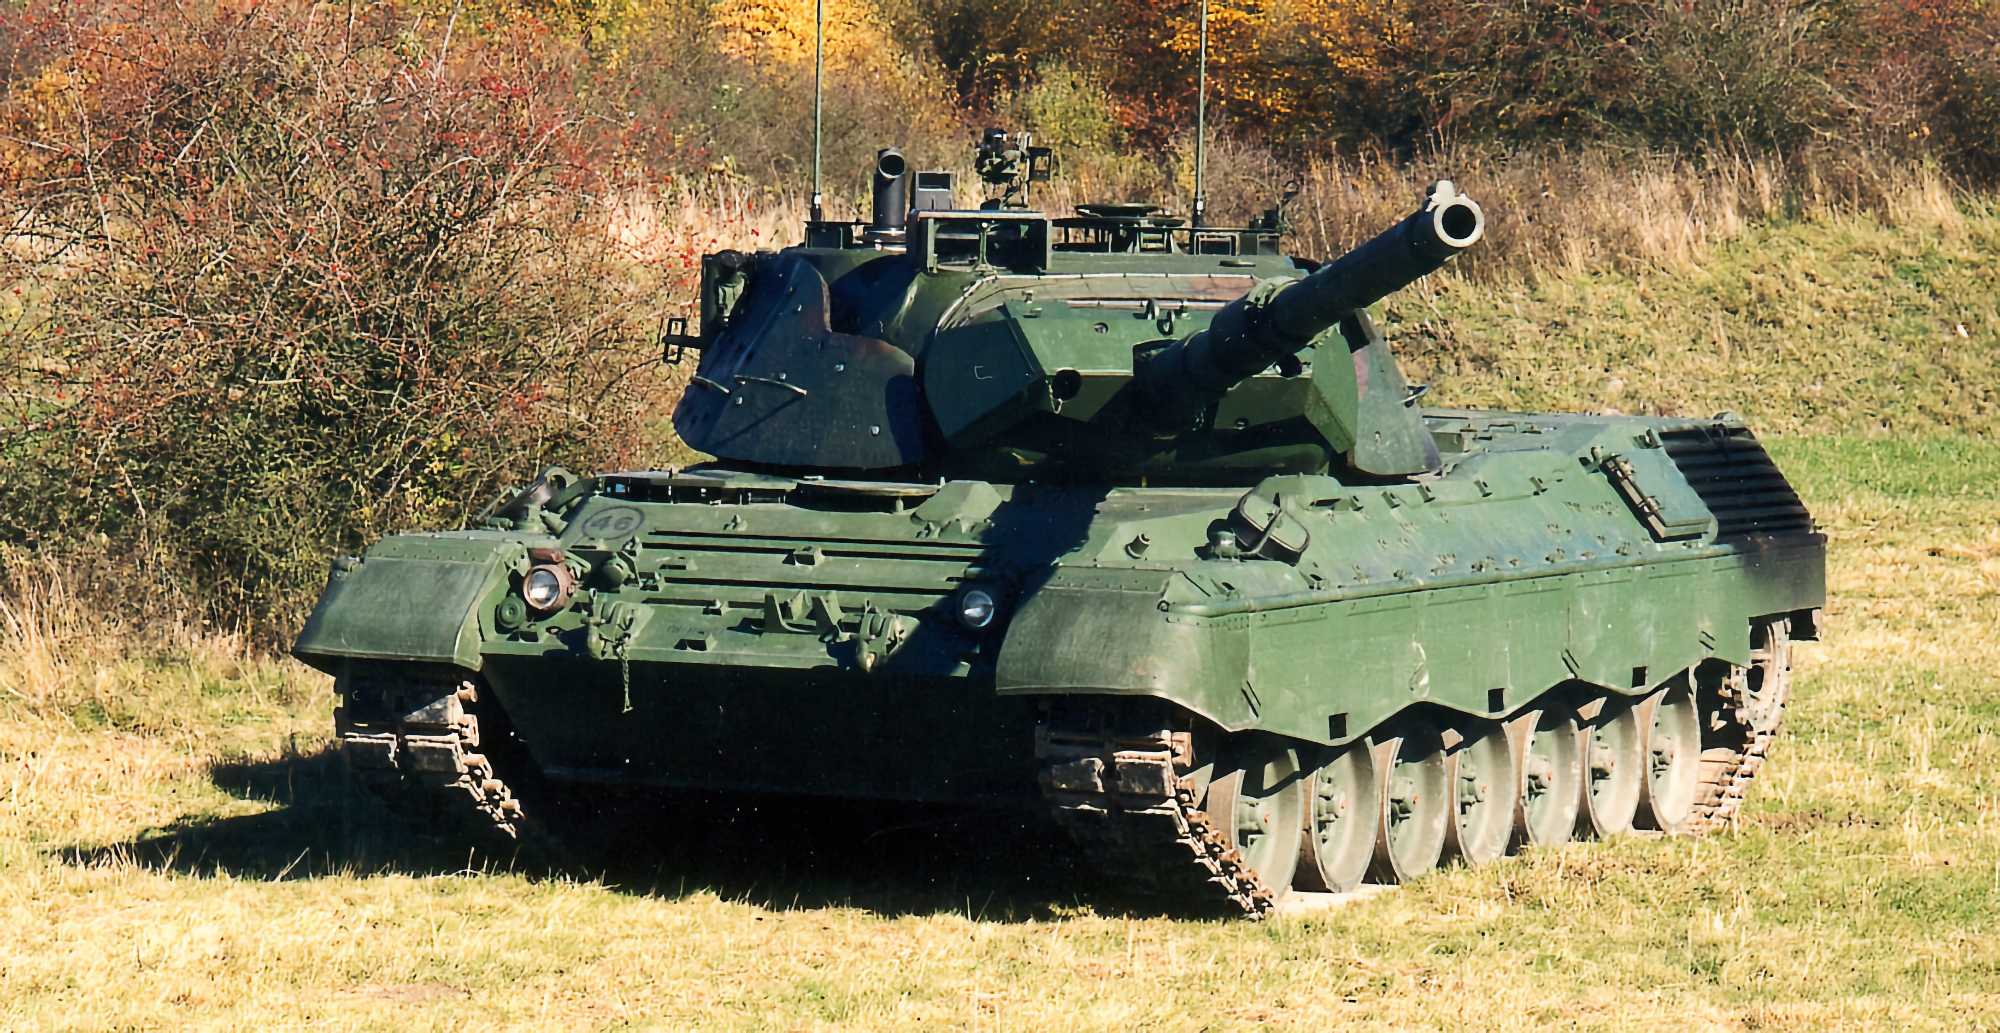 Germany has confirmed that it will supply Ukraine with an additional batch of Leopard 1 tanks